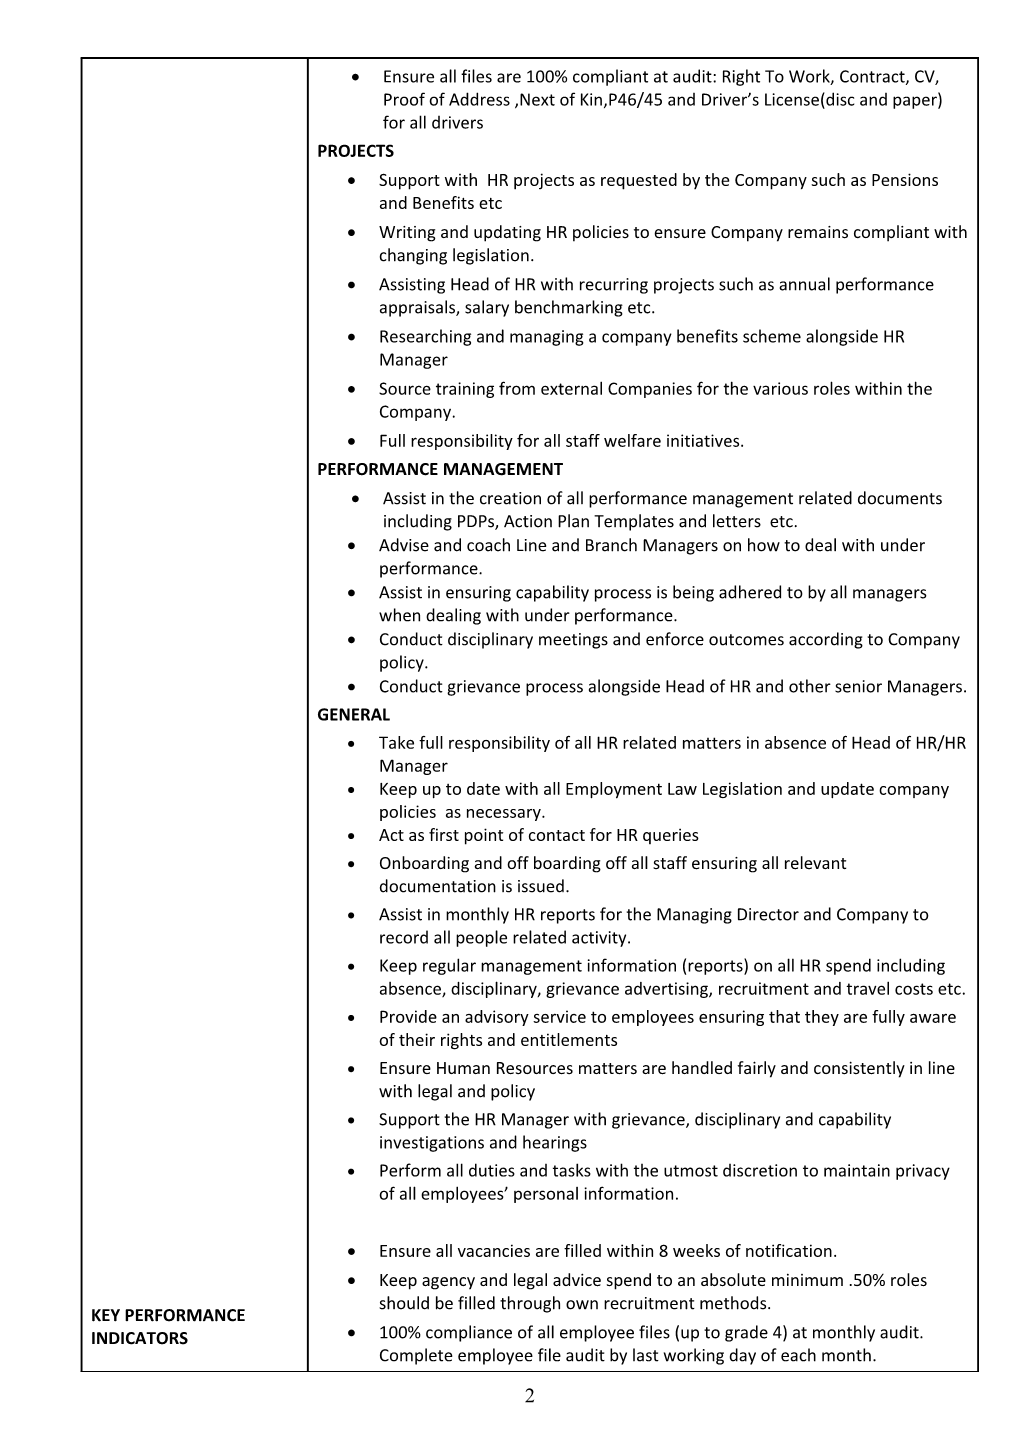 Barclays Standard Role Profile - Effective 31 May 2007